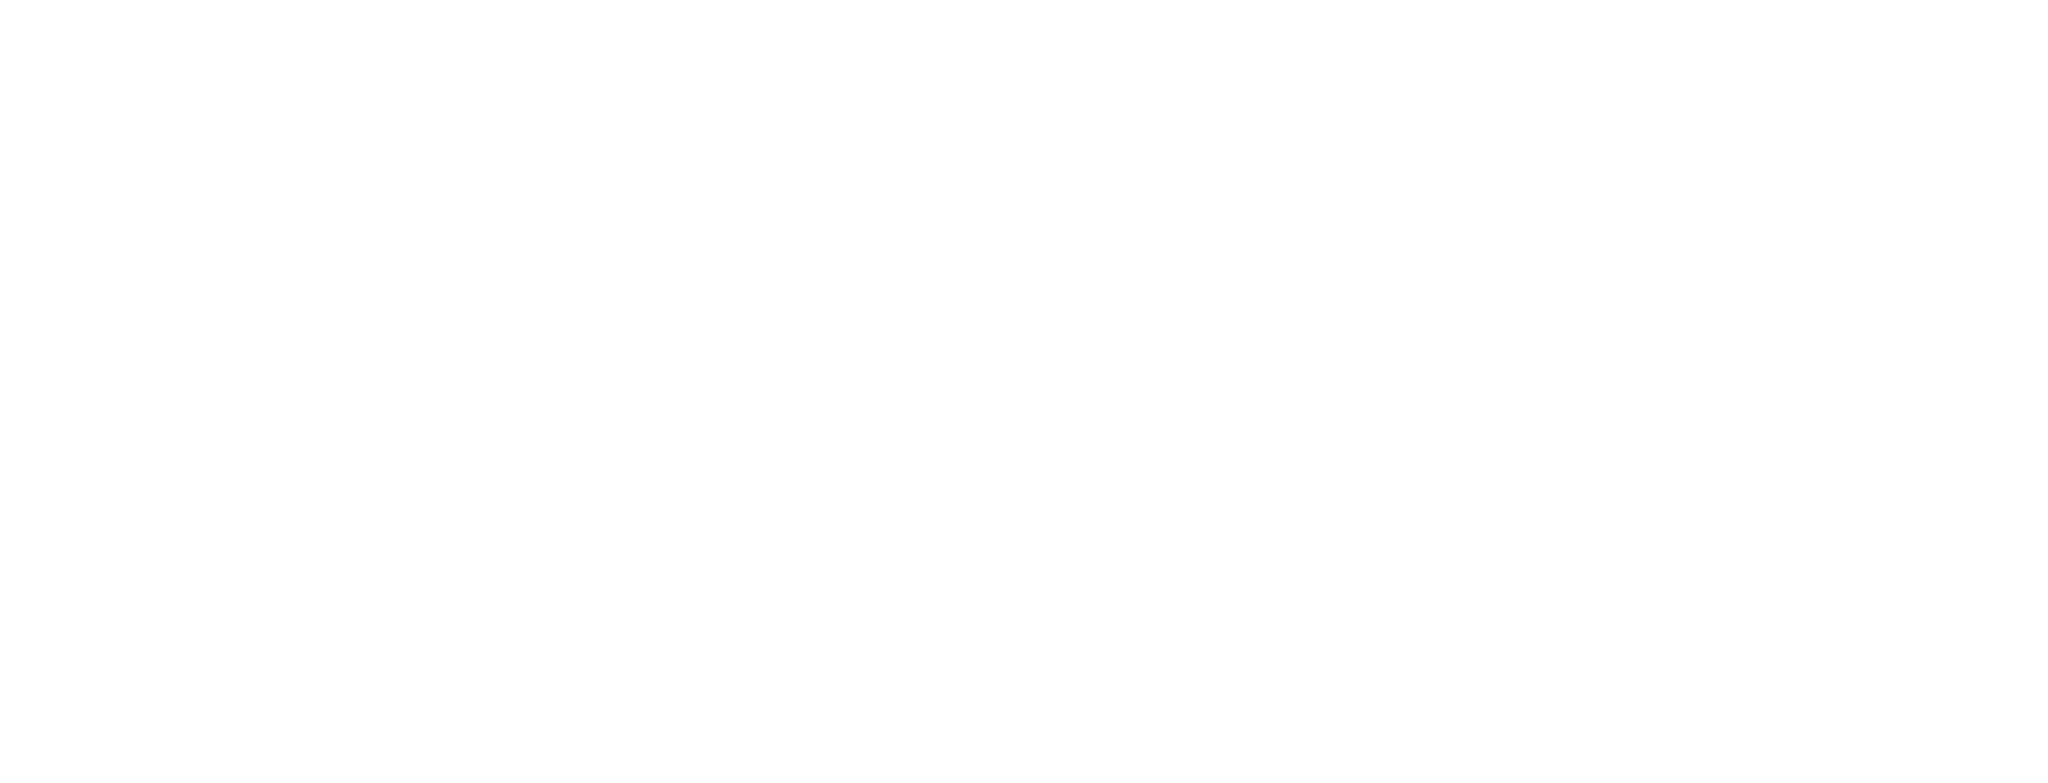 Platinum-Electrical-Projects